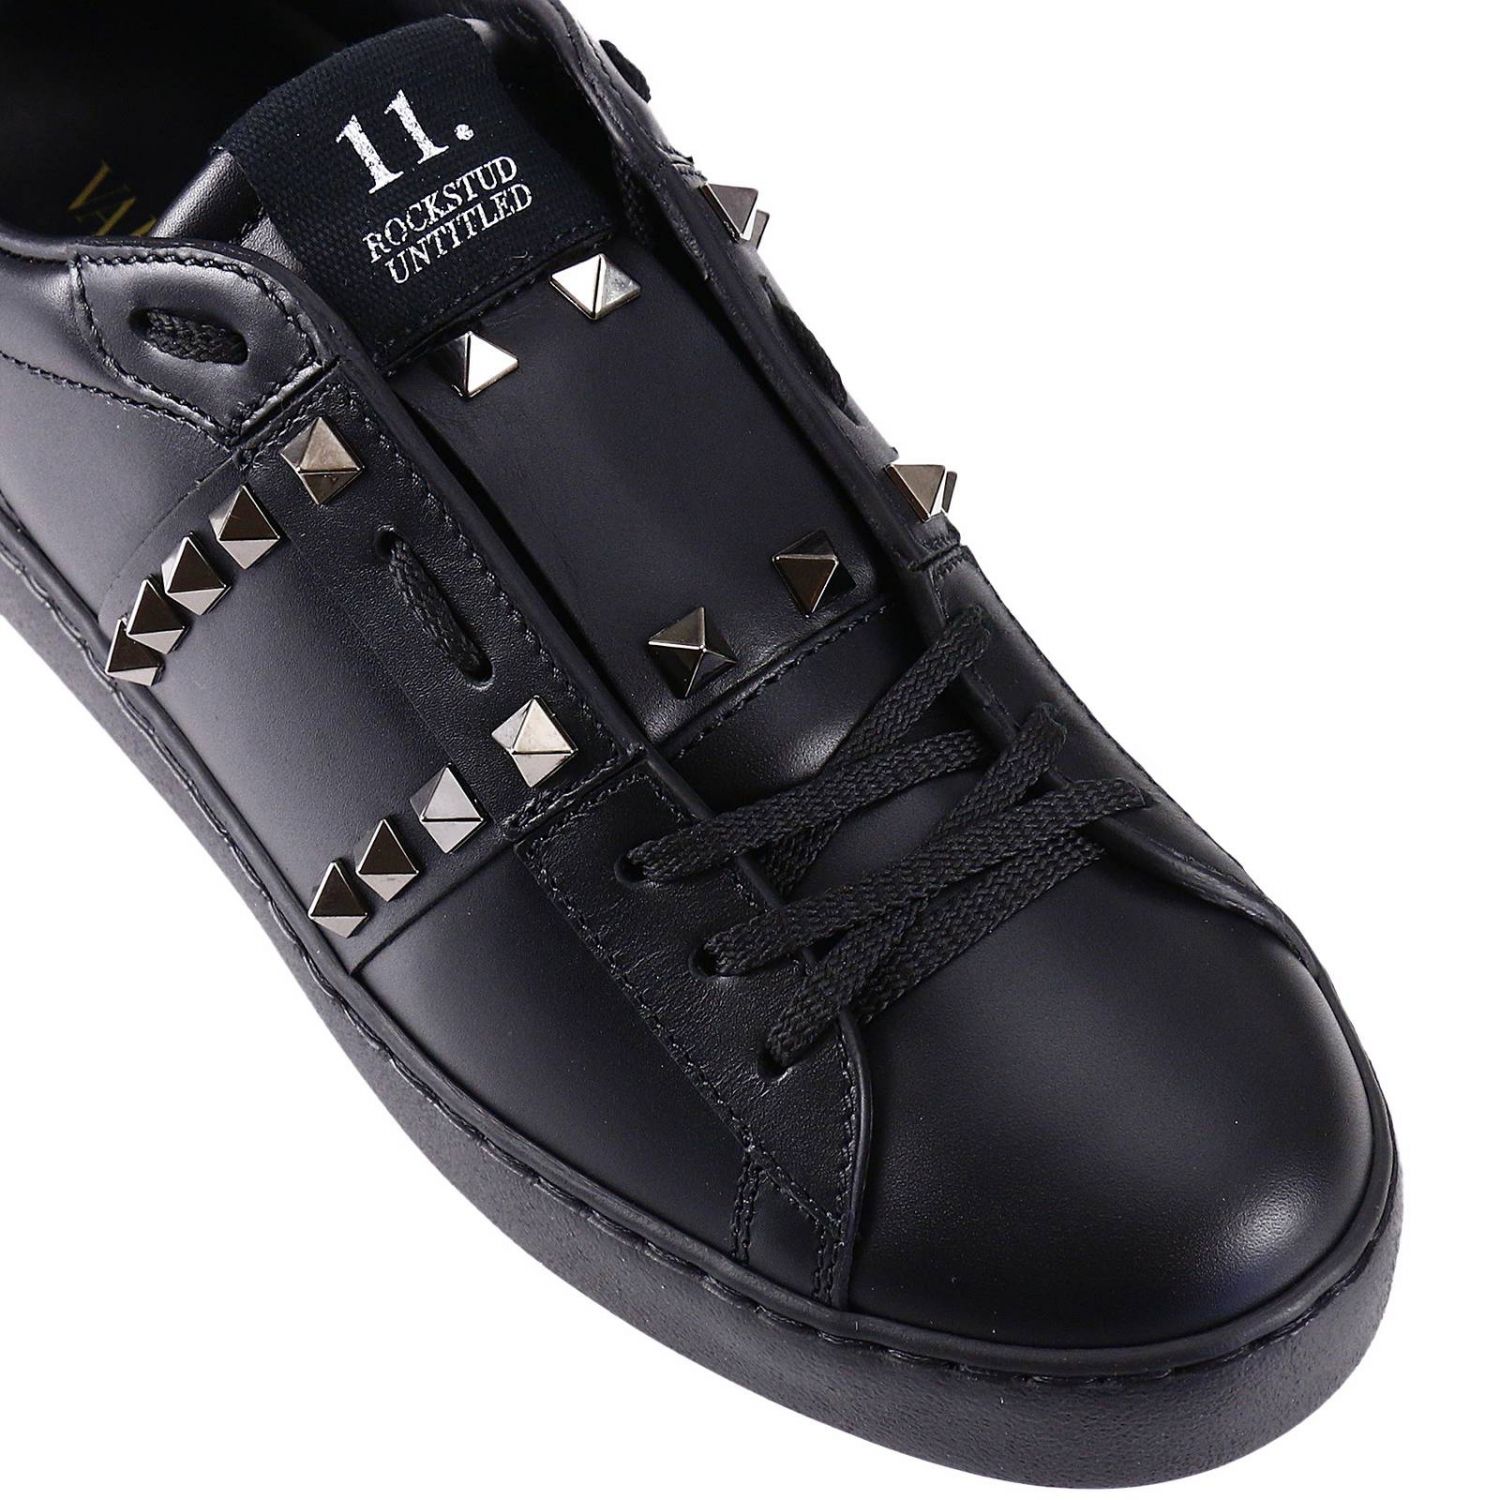 Rockstud Untitled 11. Lace up Sneakers with maxi metal studs